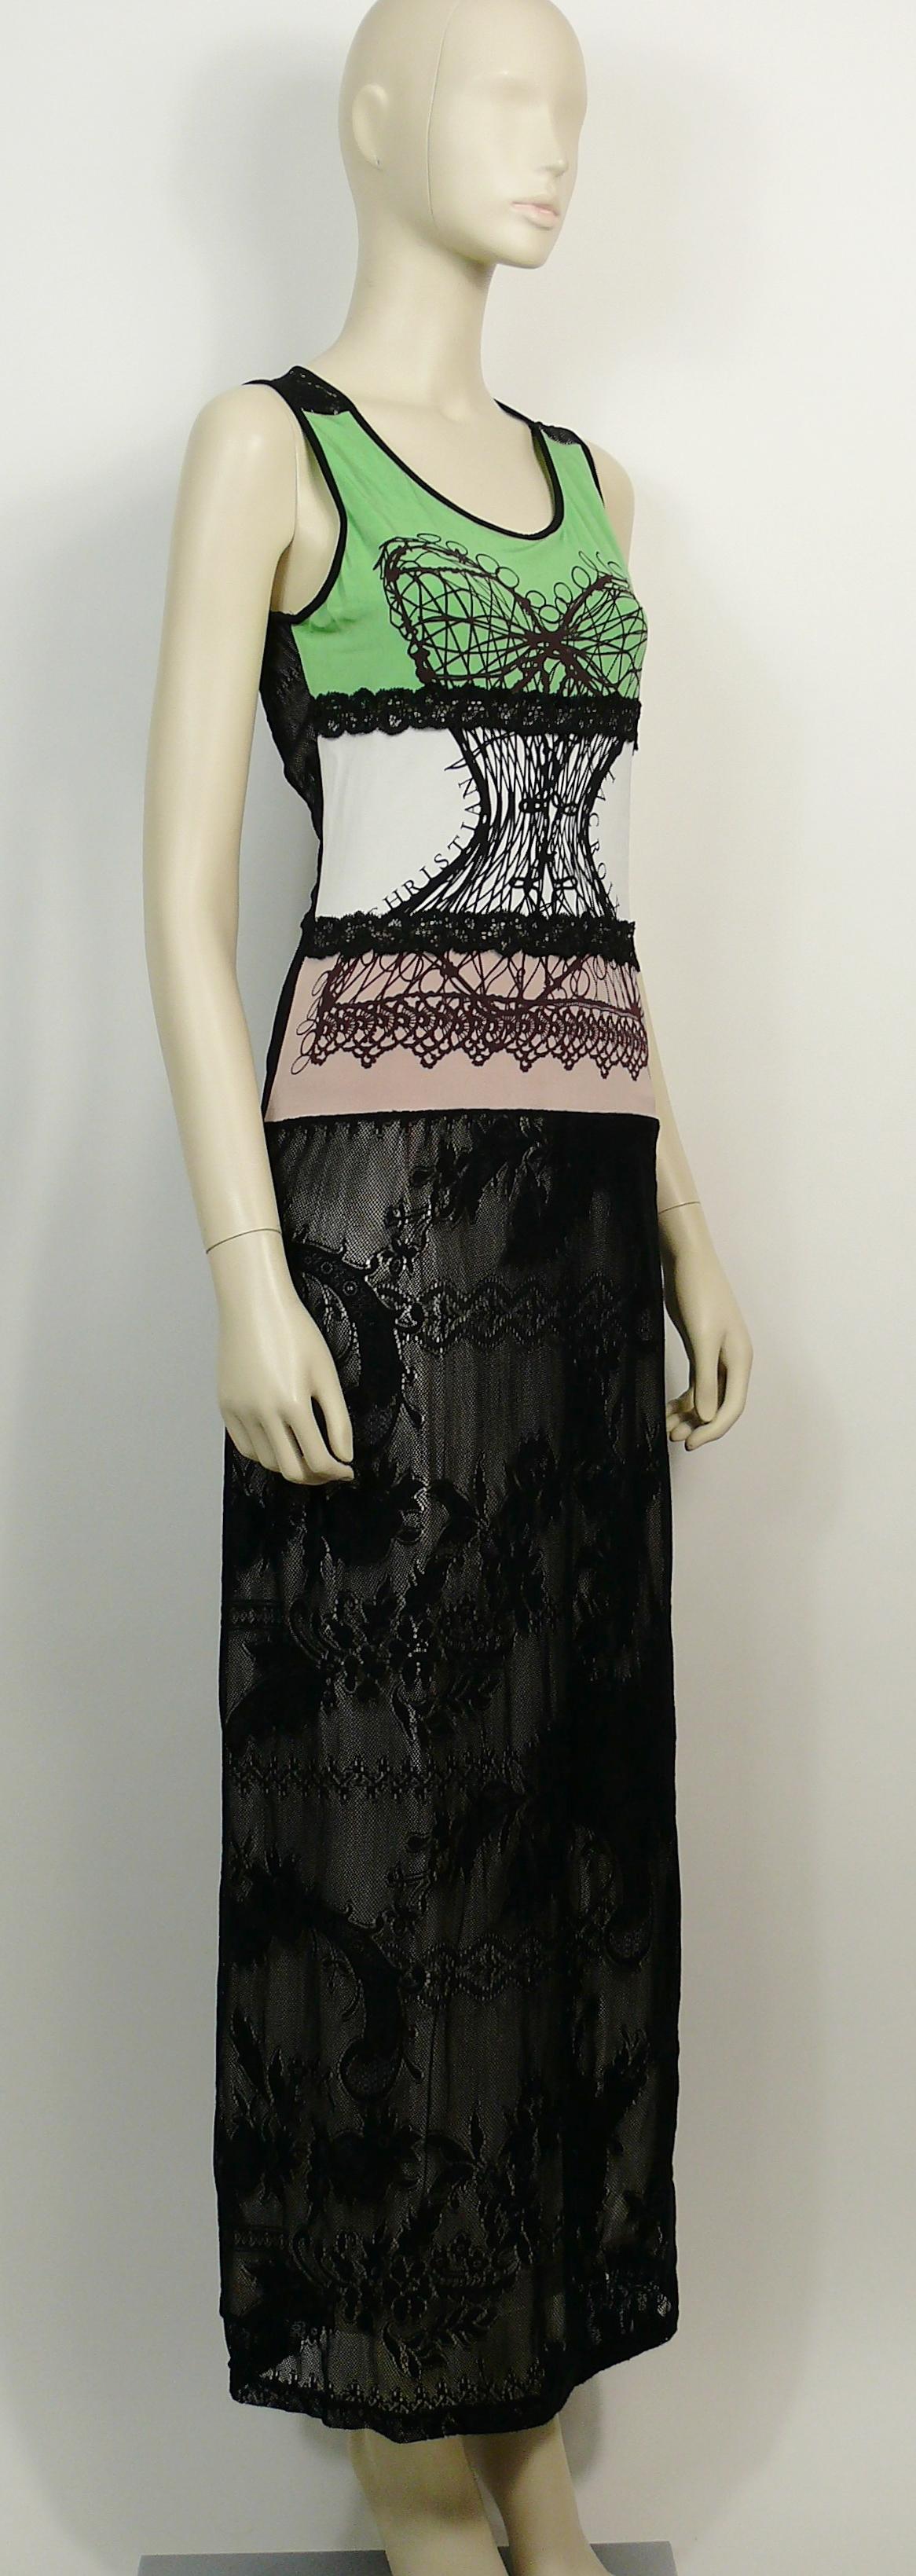 CHRISTIAN LACROIX vintage multicolor lace tank maxi dress featuring a corset print at front with CHRISTIAN LACROIX signature.

Slips on.

Has stretch.

Label reads BAZAR de CHRISTIAN LACROIX.
Made in Italy.

Size tag reads : XL.
Please refer to